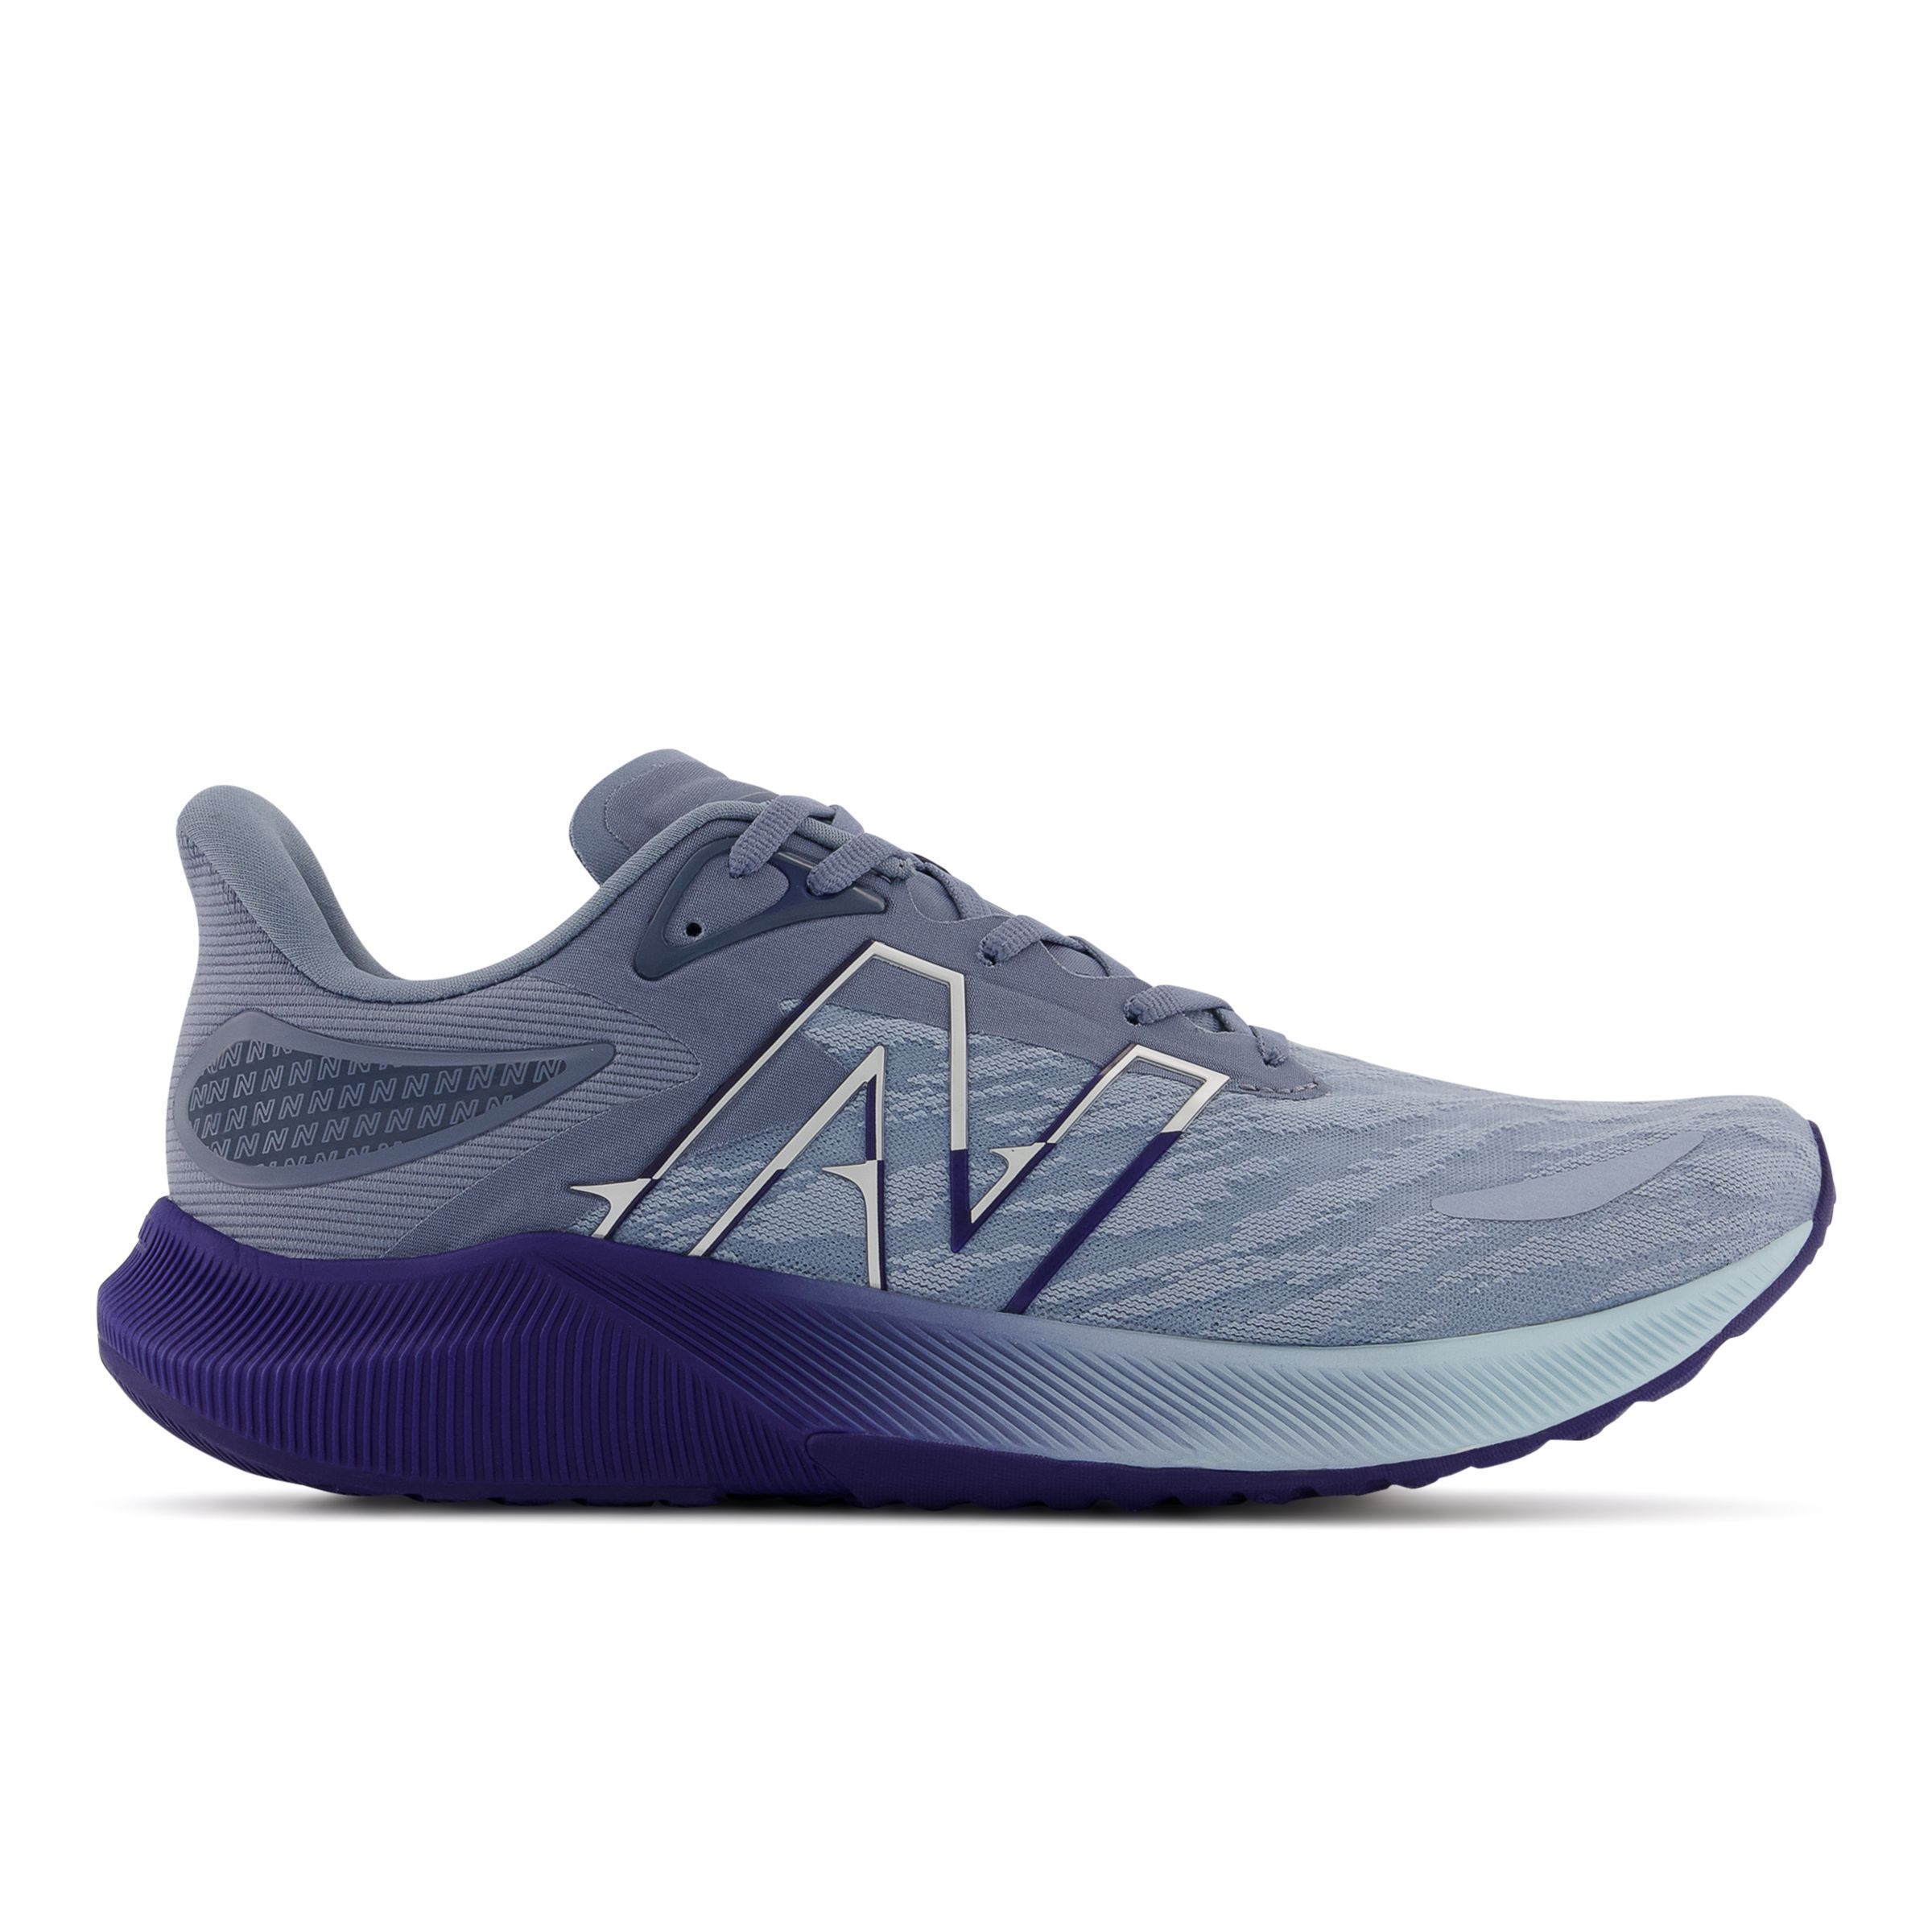 New Balance Homme FuelCell Propel v3 en Bleu, Synthetic, Taille 44.5 Large